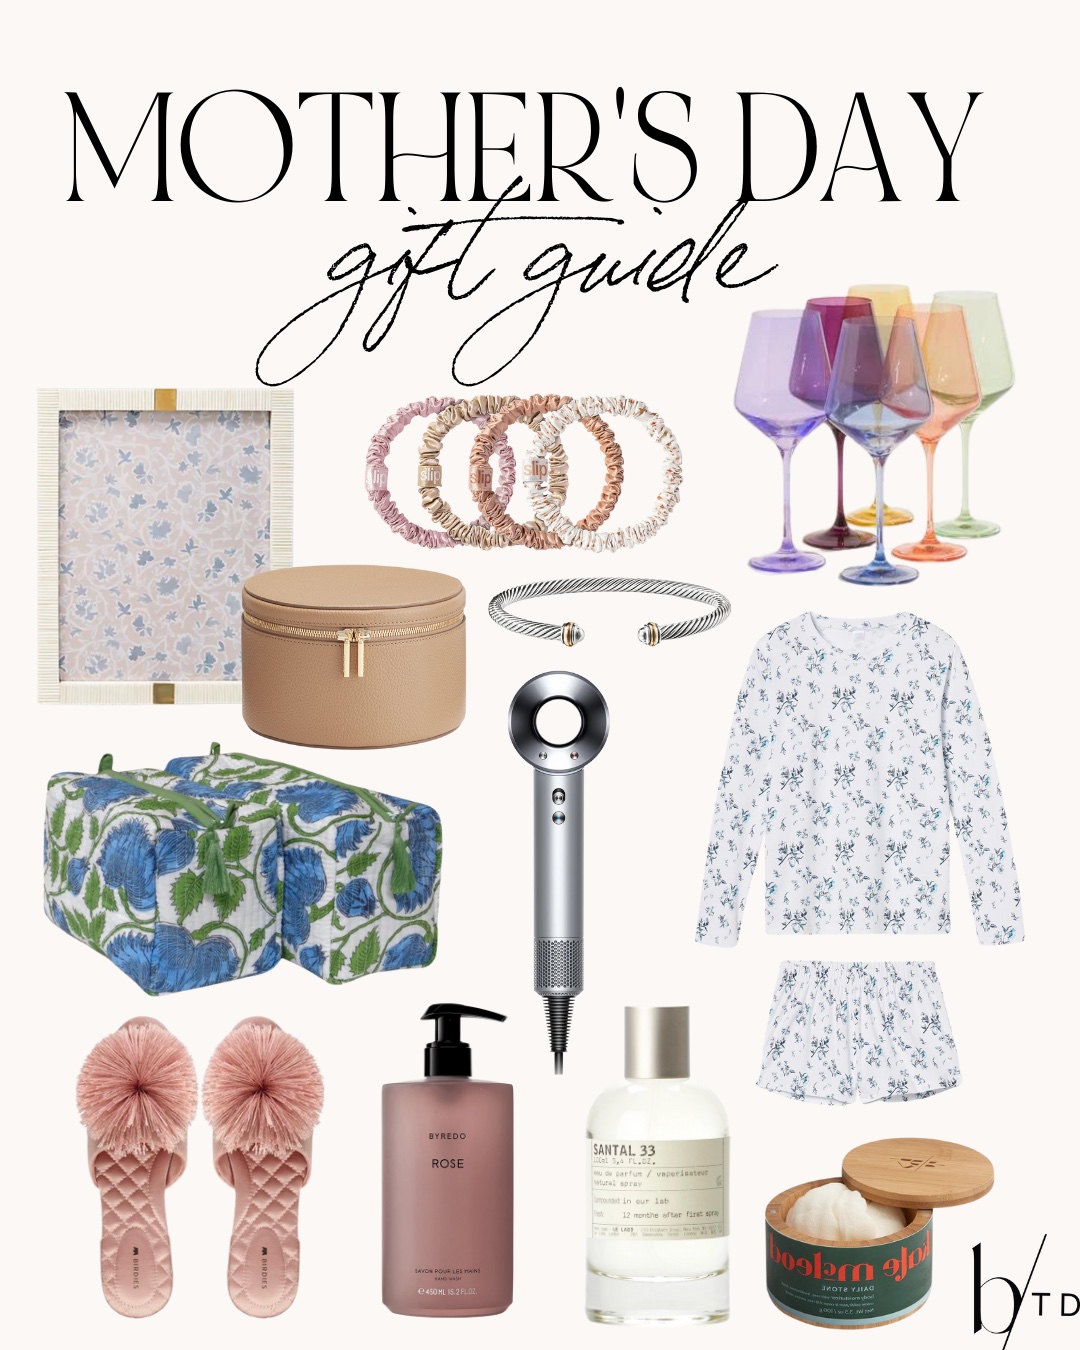 https://www.brightontheday.com/wp-content/uploads/2022/04/Brighton-Butlers-Mothers-Day-Gift-Guide.jpg